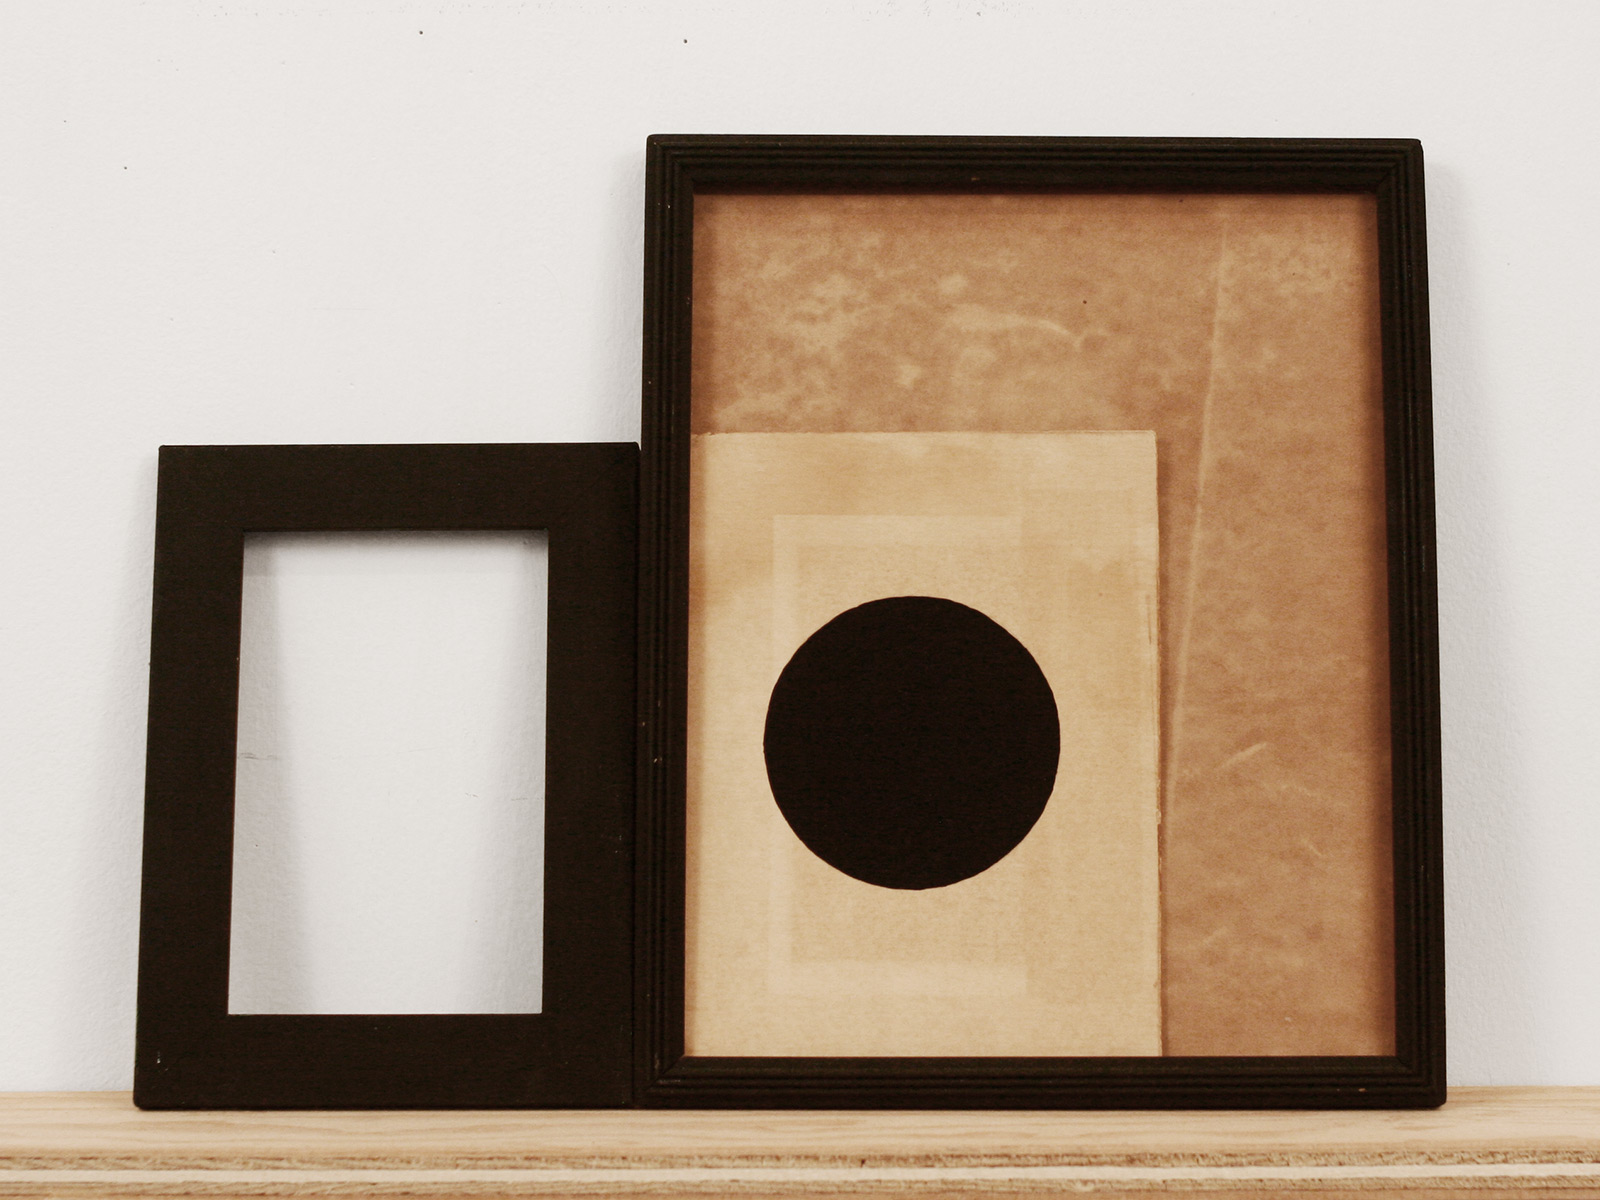 The Sum of Parts 2. Flashe, gouache, frames, vintage boards. 2014.